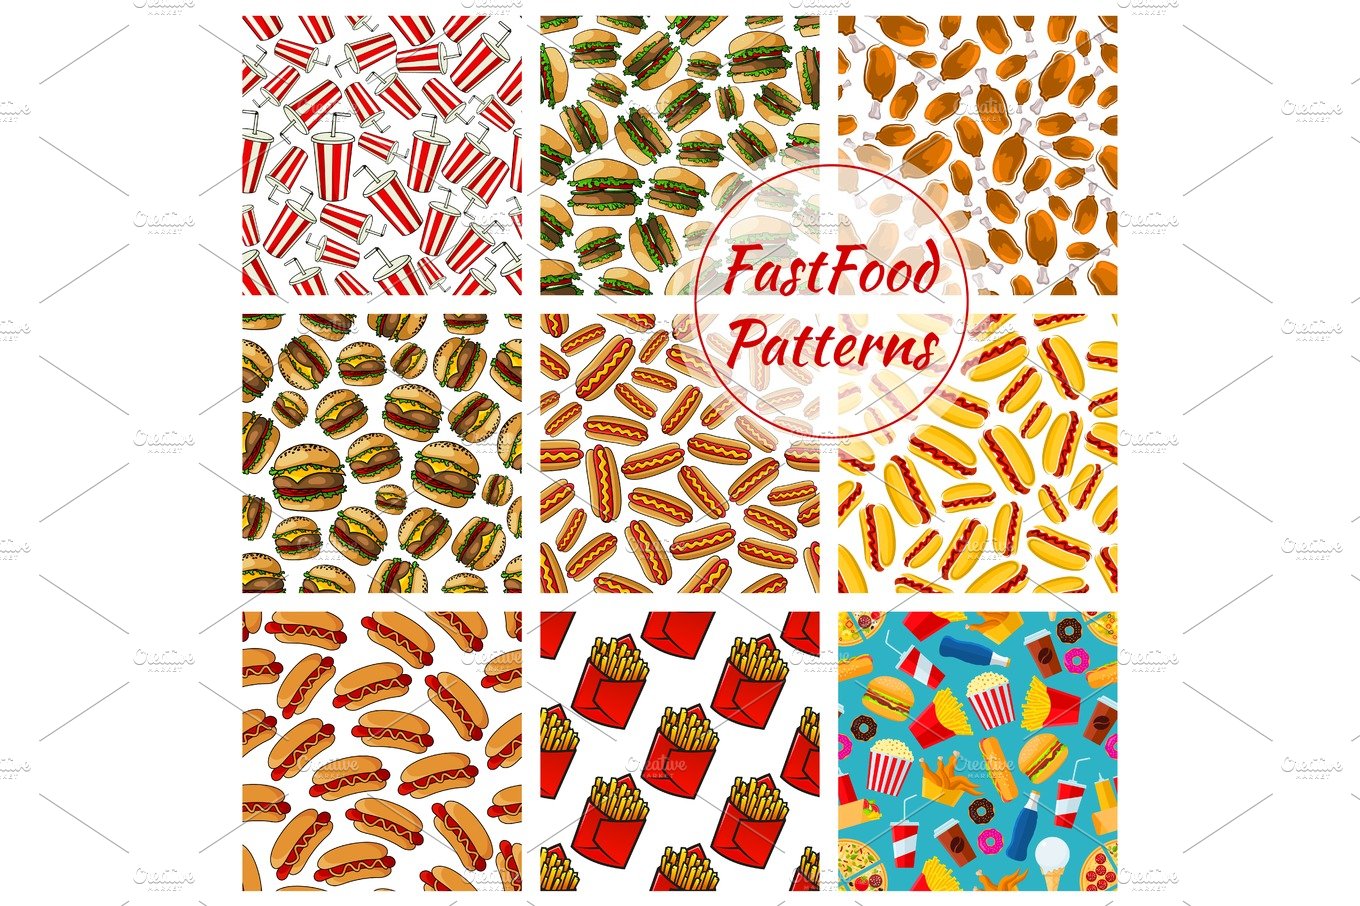 Fast food meal snacks vector seamless patterns set cover image.